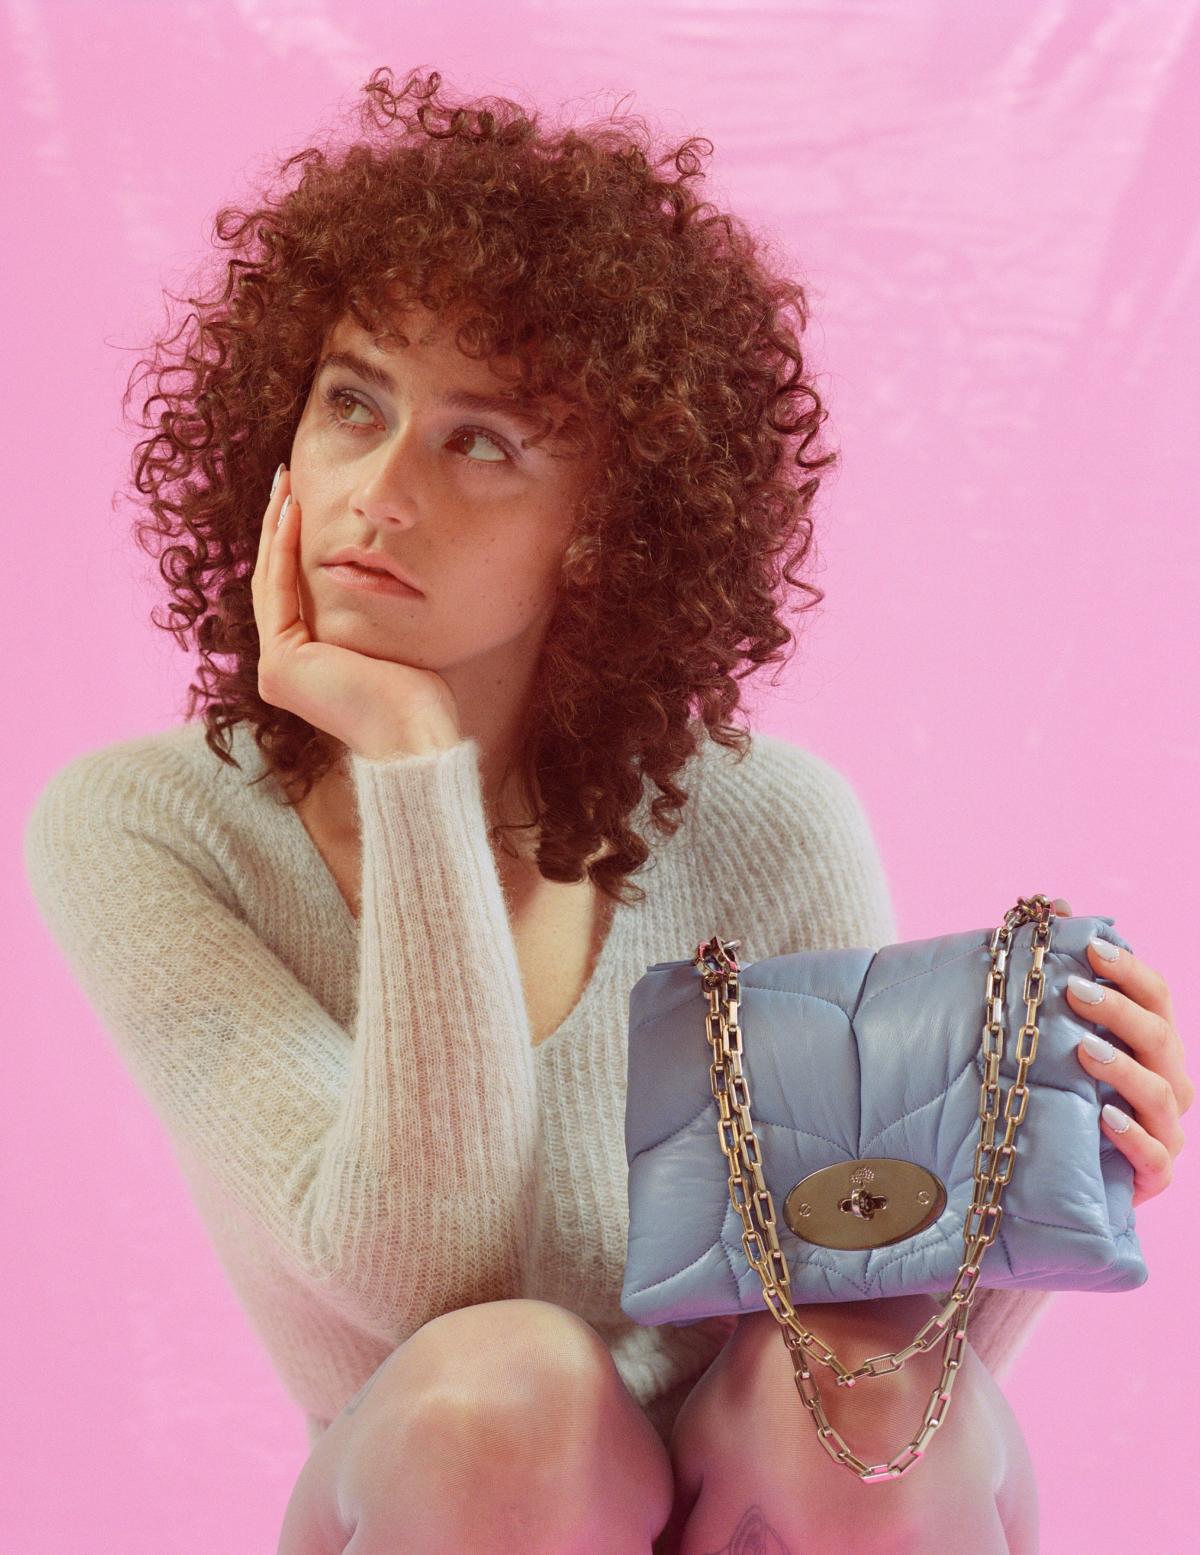 Ella Emhoff Kamala Harris Stepdaughter Lands Fashion Ad Campaign With Mulberry 